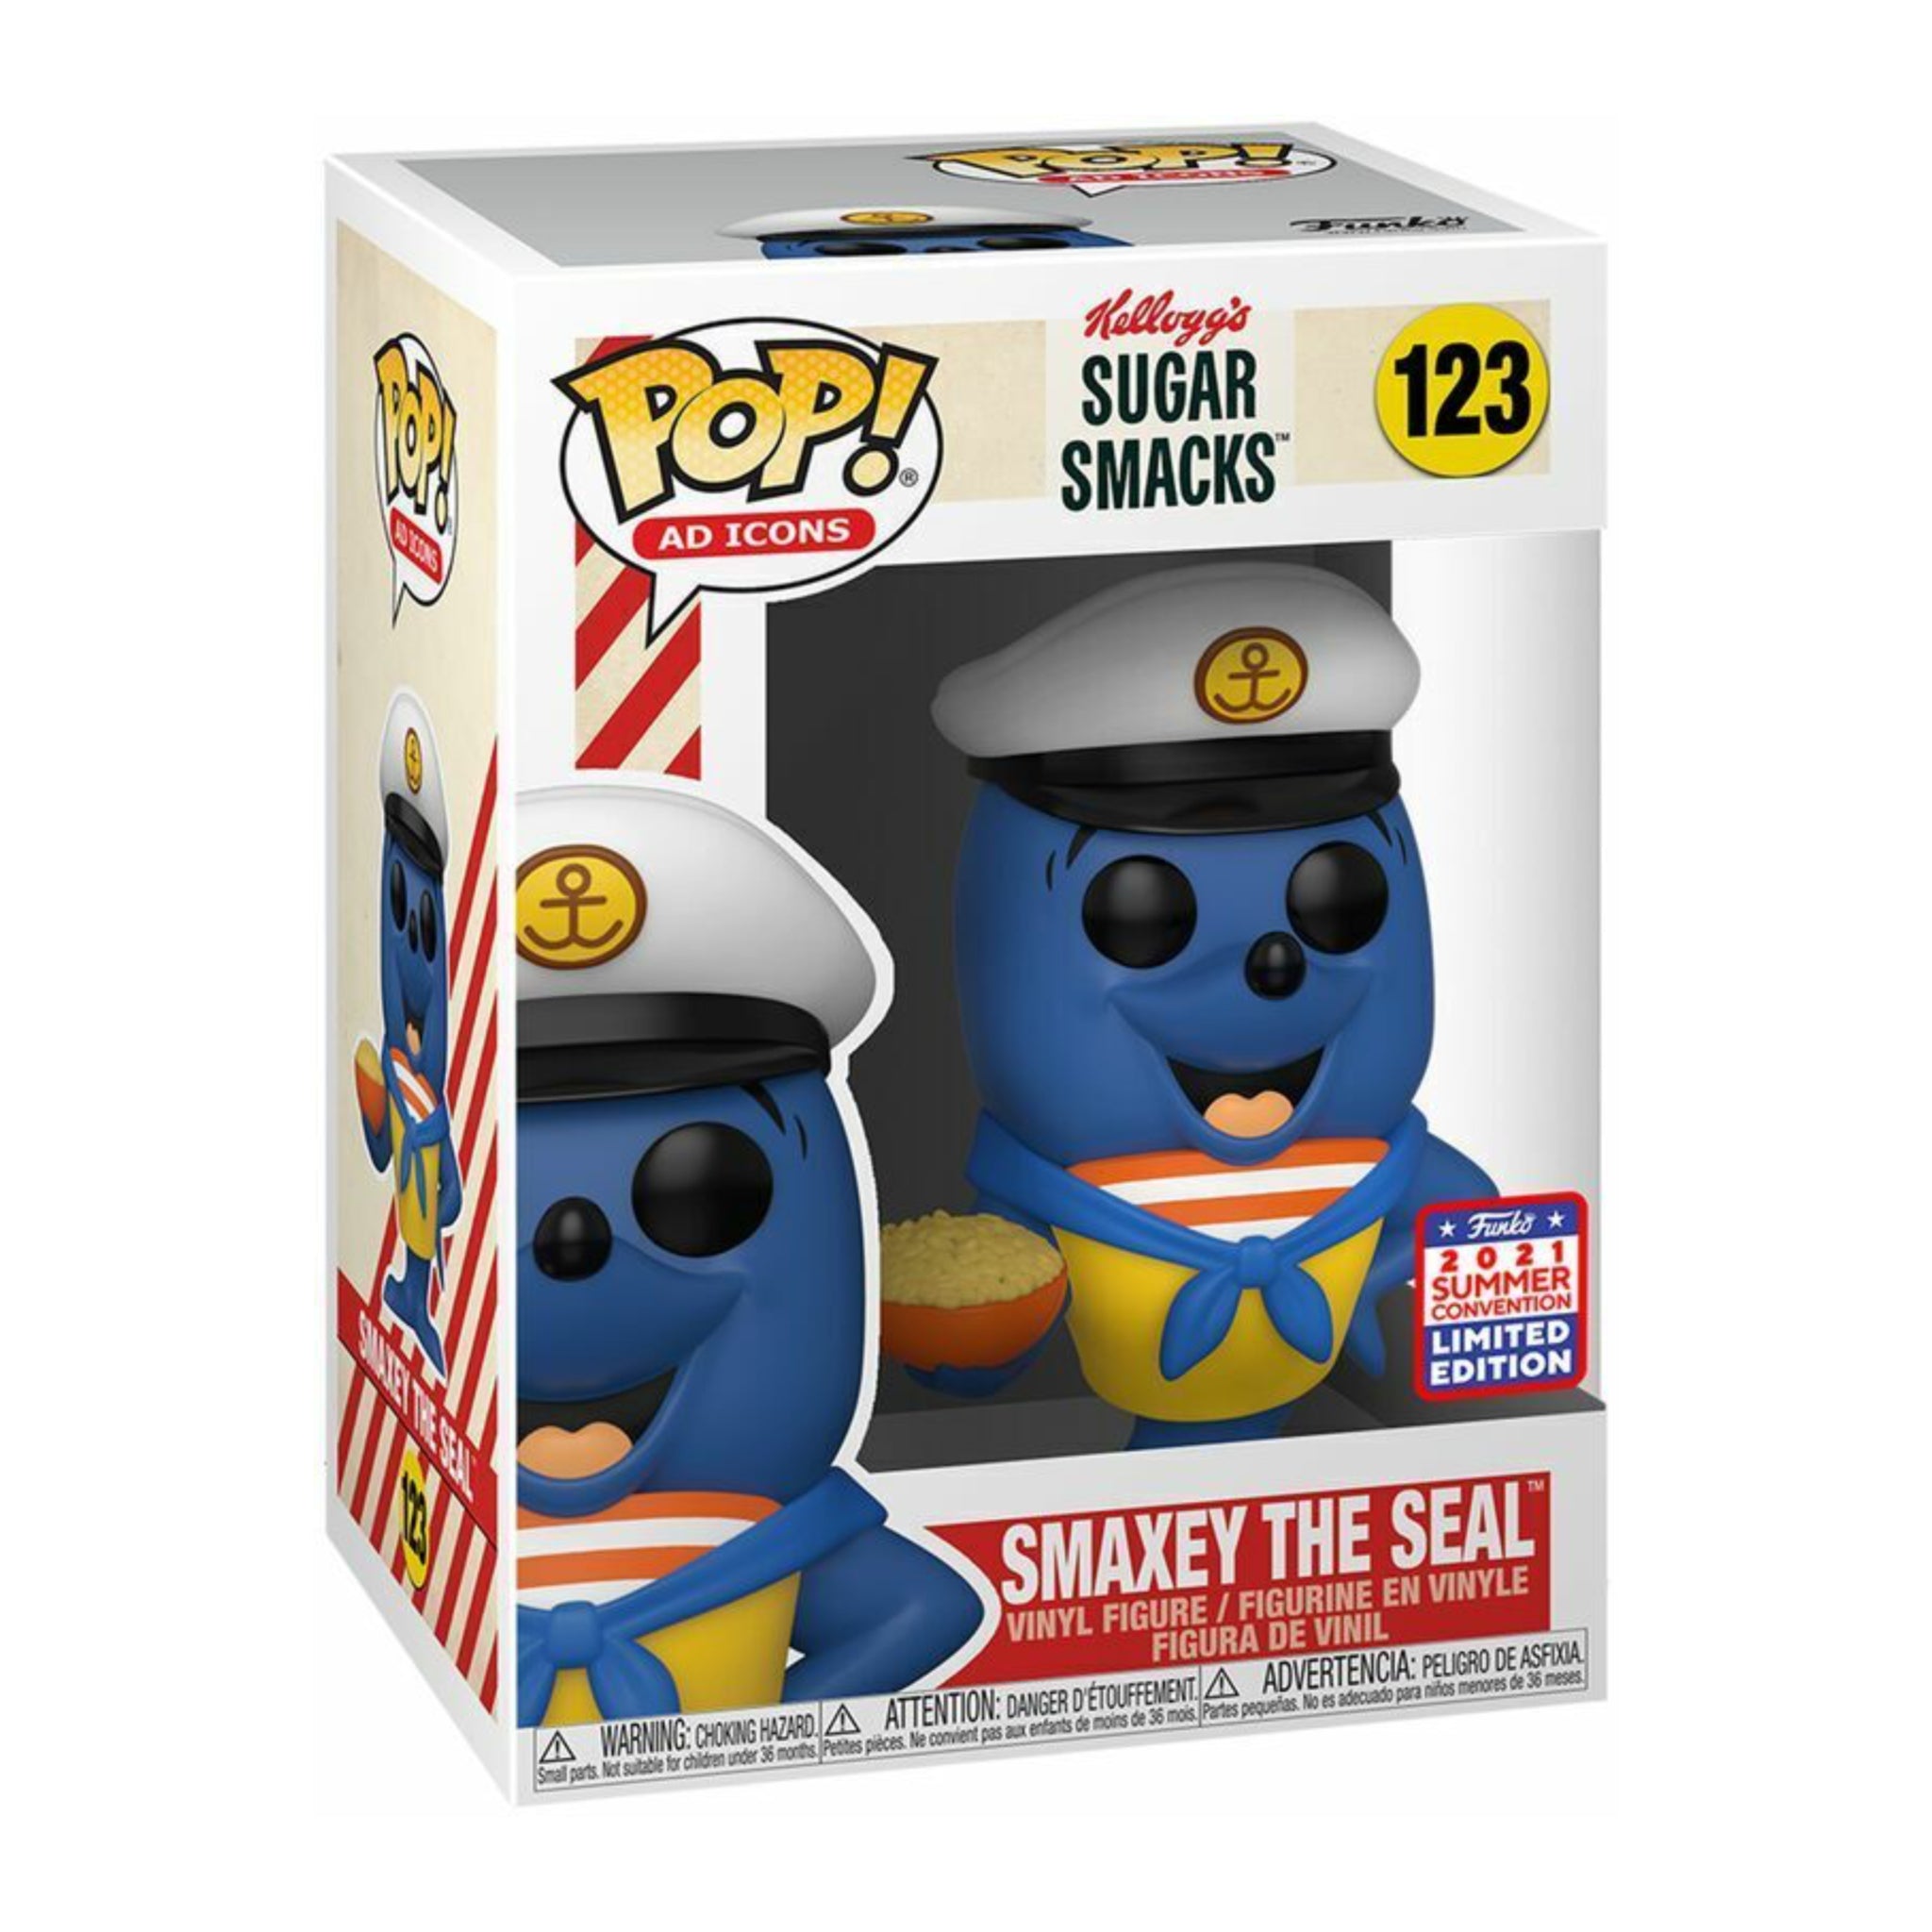 Smaxey the Seal LIMITED EDITION Funko Pop! 2021 SUMMER VIRTUAL FUNKON